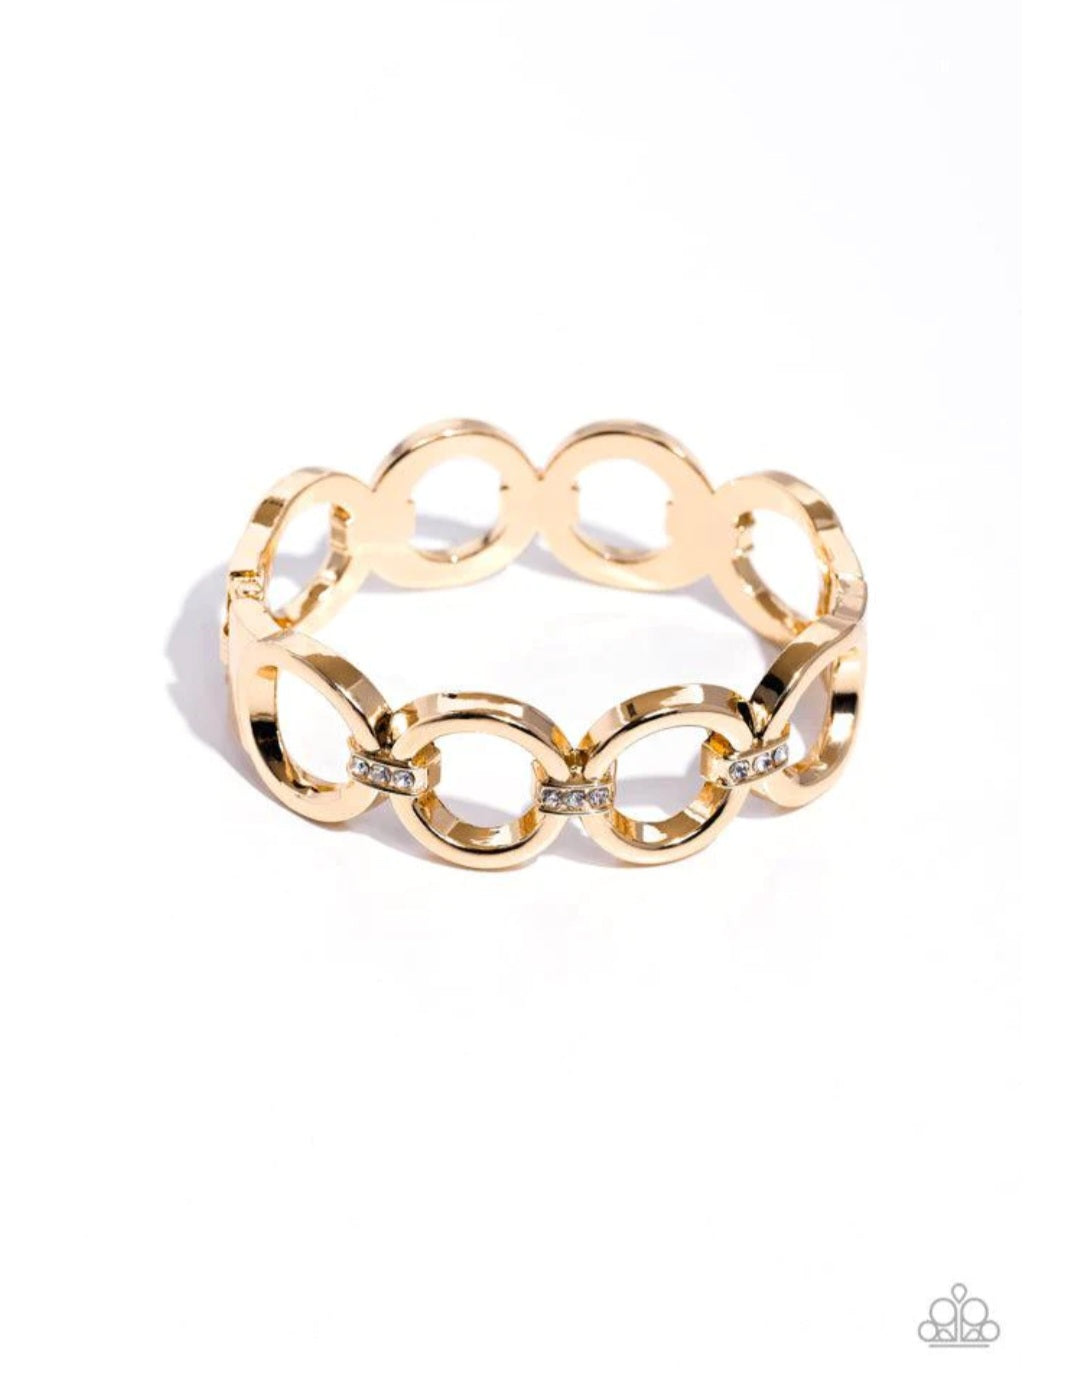 Chic Collection - Gold Bracelet - Paparazzi Accessories - Bold gold hoops, connected by rows of white rhinestone-encrusted frames, link around the wrist for a fierce look. Features a hinged closure. Sold as one individual bracelet.